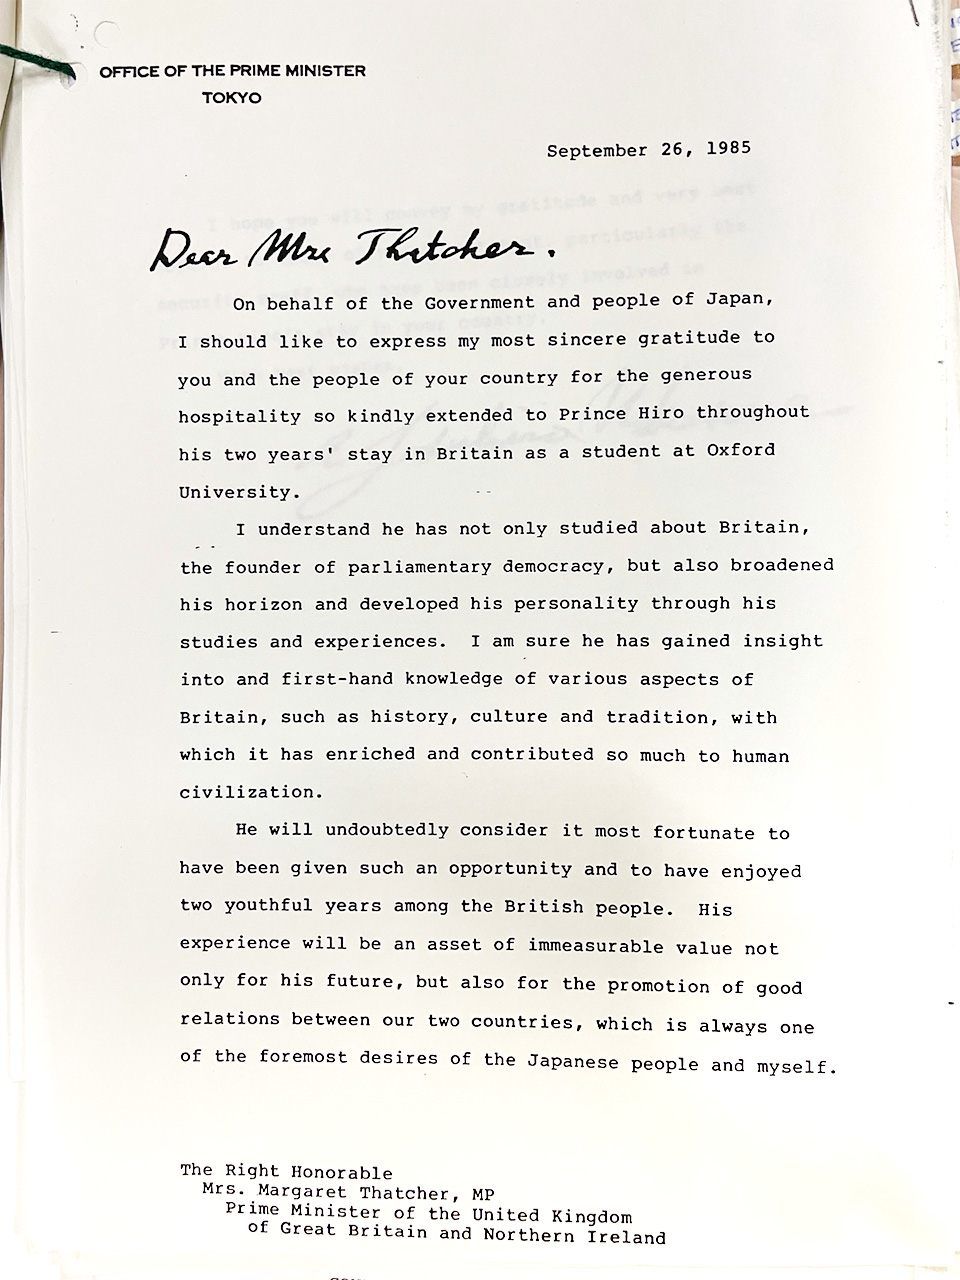 Page 1 of Prime Minister Nakasone’s letter to Prime Minister Thatcher. (Courtesy of the British National Archives; photo by author)